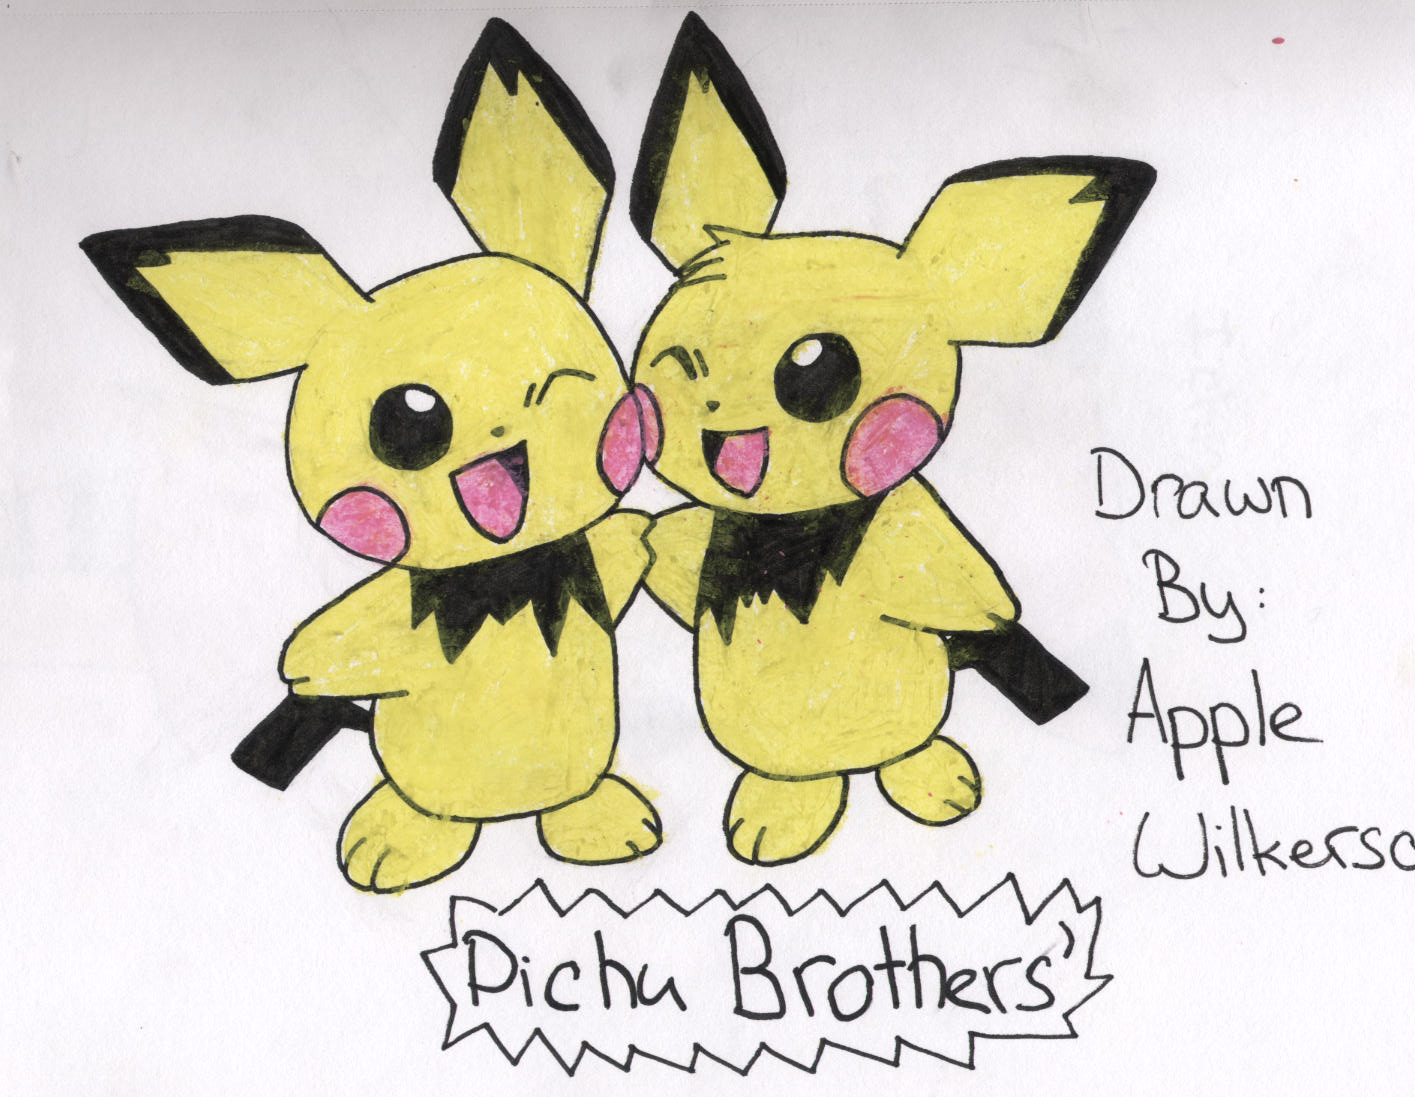 Pichu Brothers by Kaiandappleforever